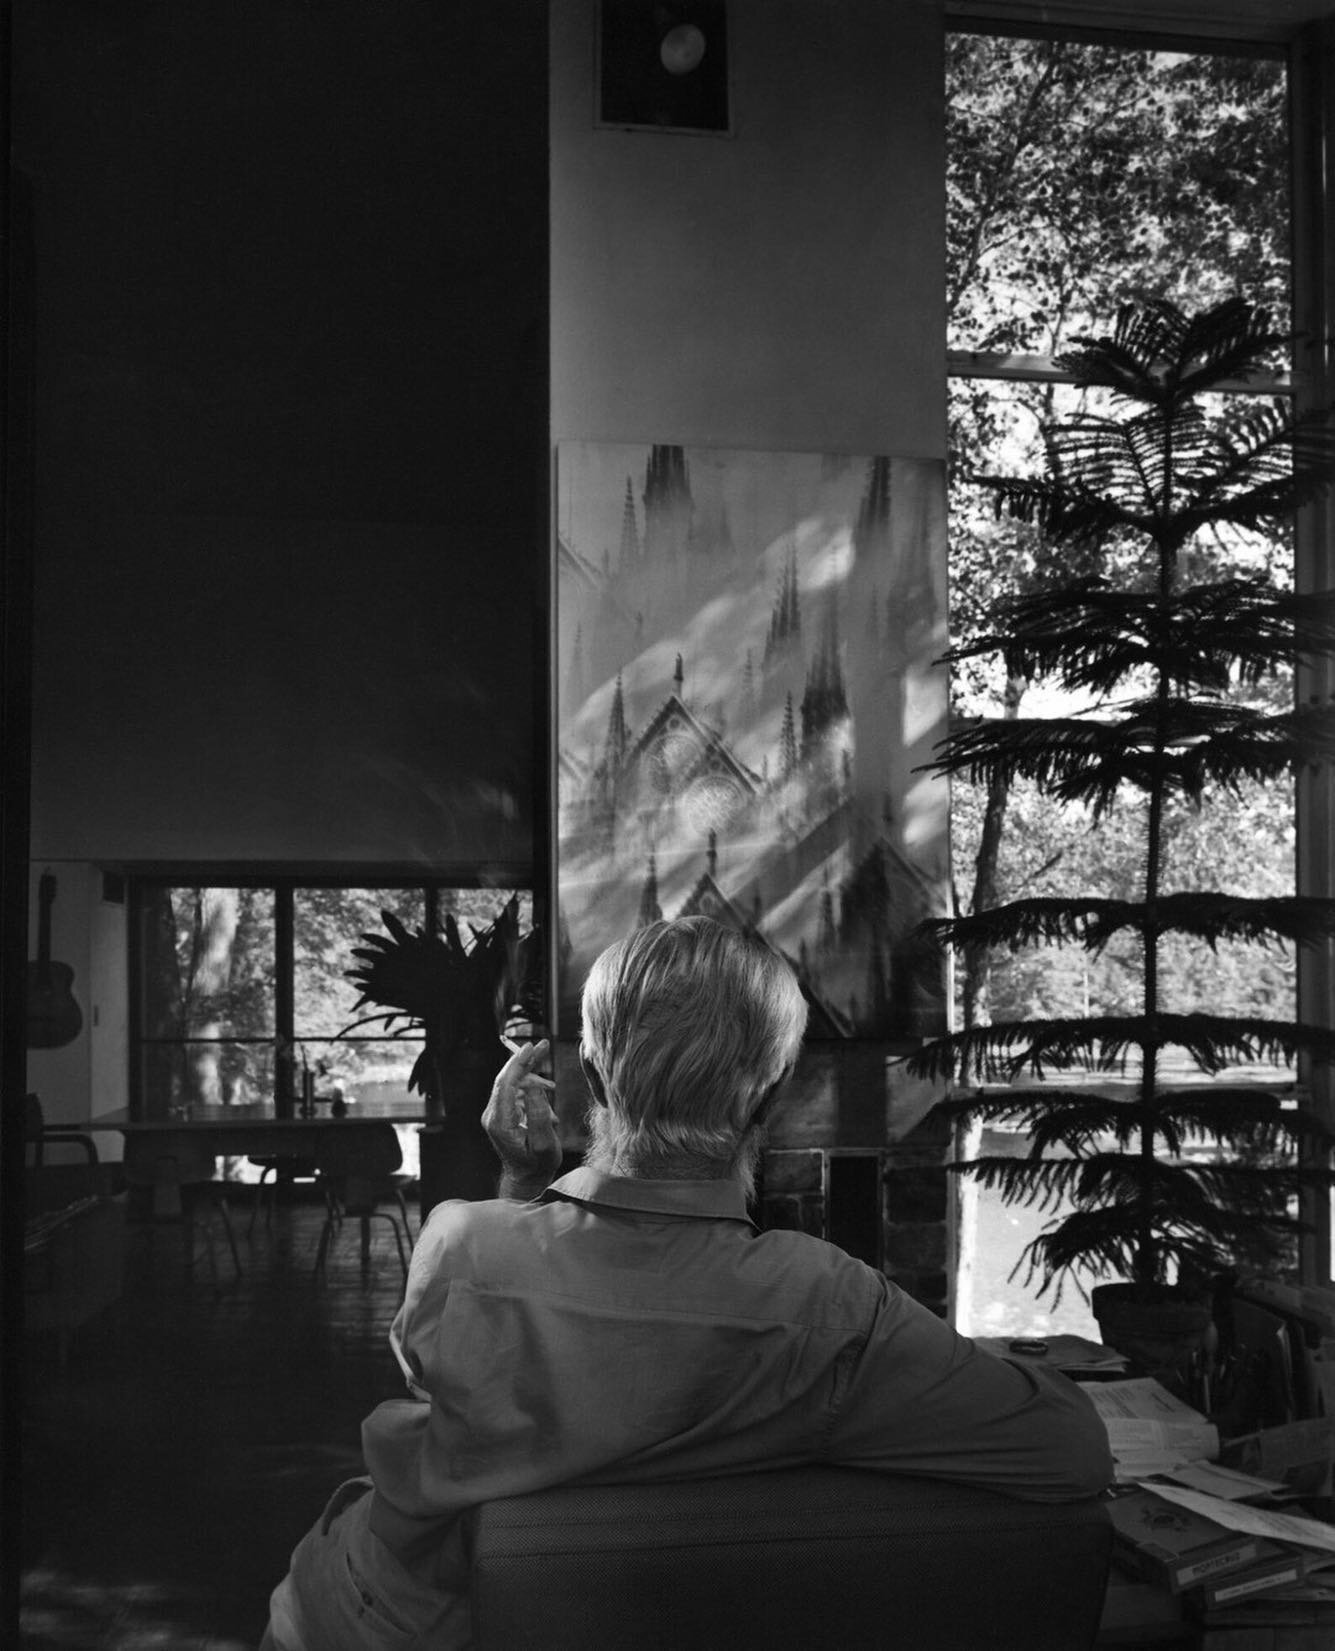 Edward Steichen's commitment to photography and to building fellowship with the next generation of photographers is palpable in the many portraits of him by taken by his fellow artists. Master photographer Yousuf Karsh's 1967 portrait of Steichen at 